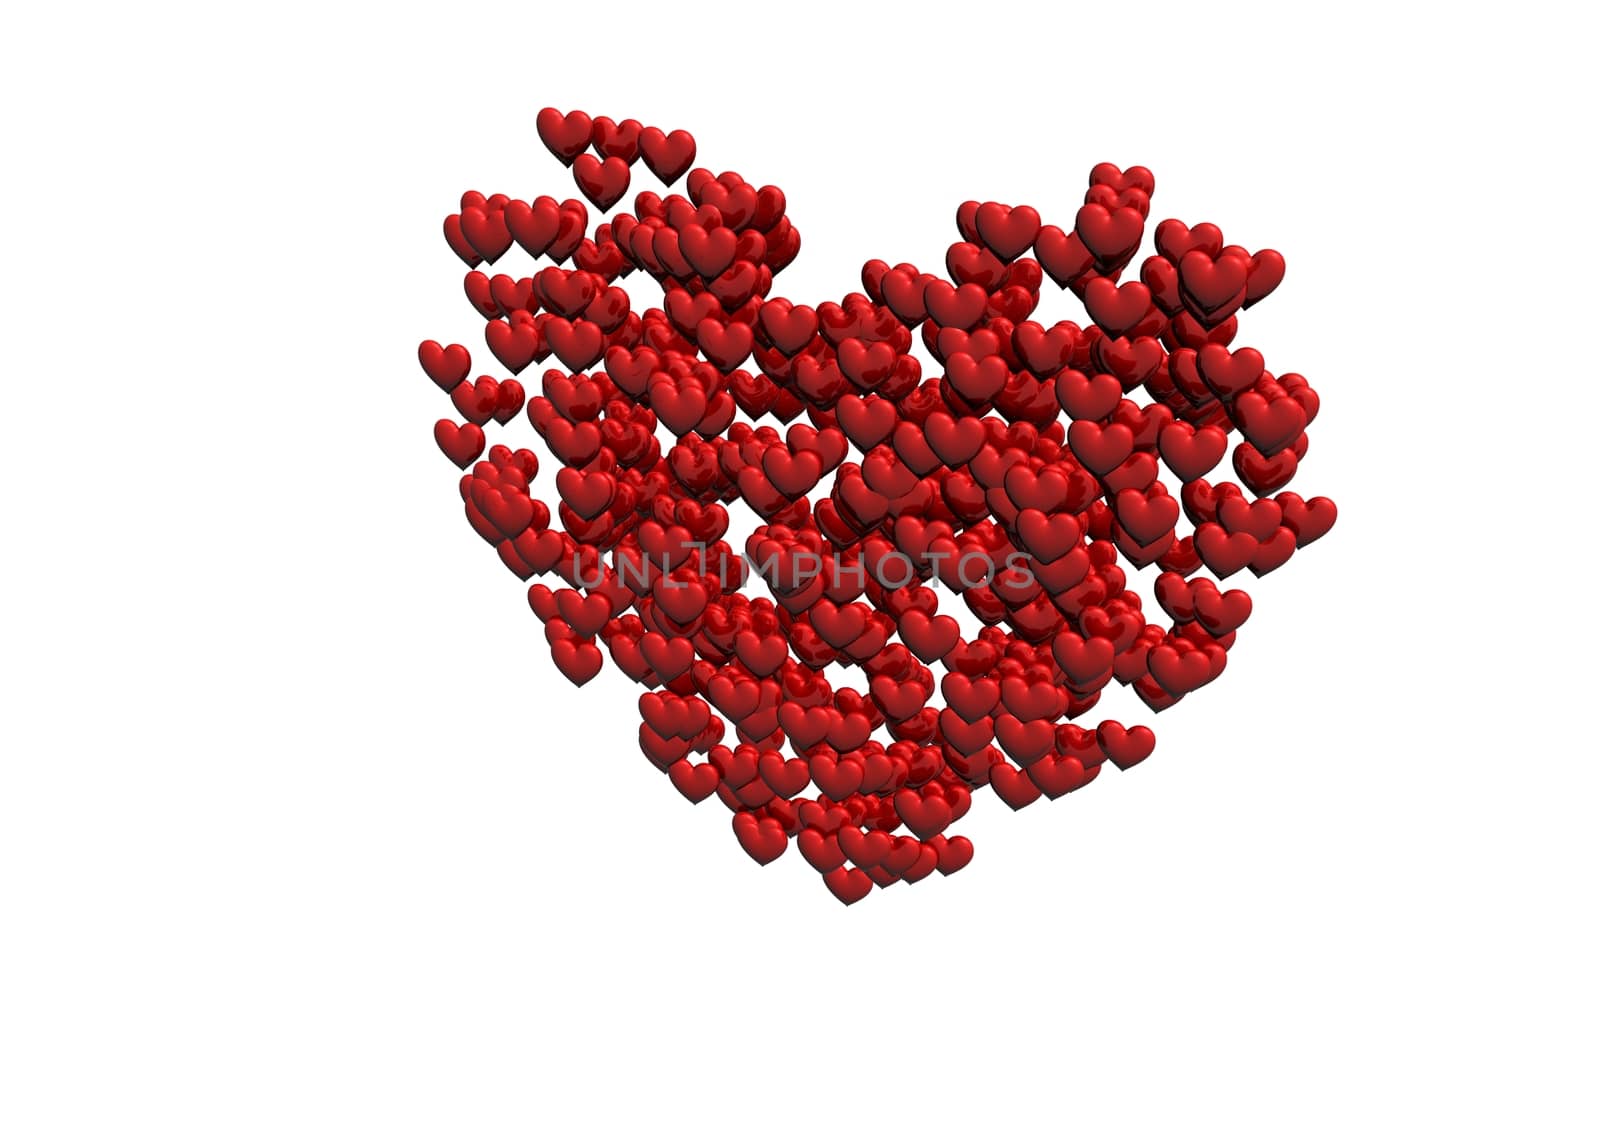 Red heart shape made of small hearts. by richter1910